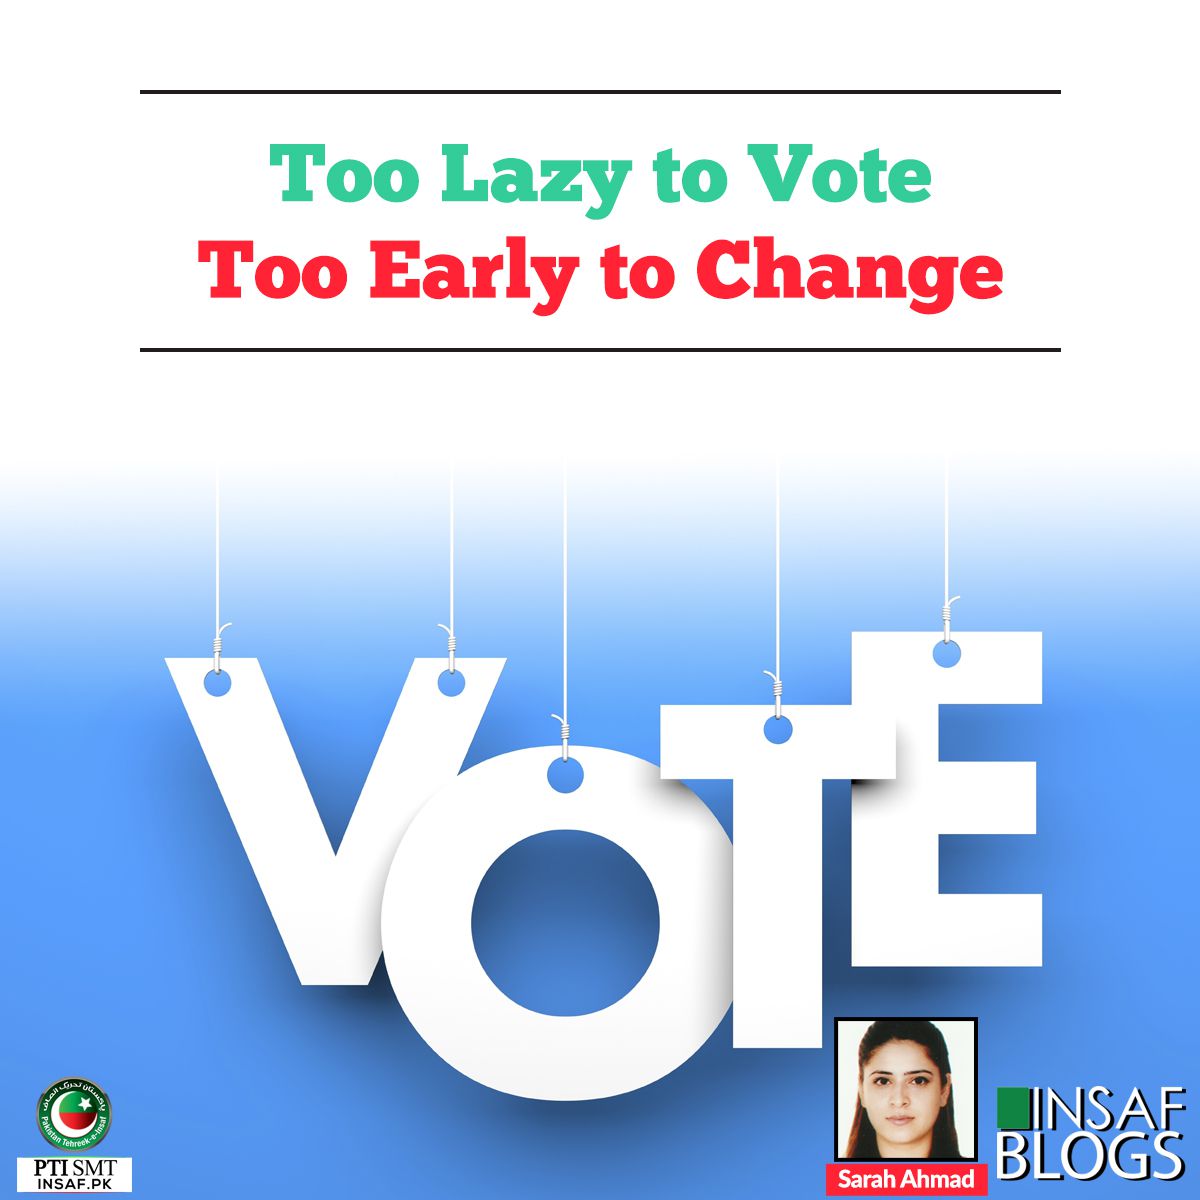 too-lazy-to-vote-sarah-ahmed.